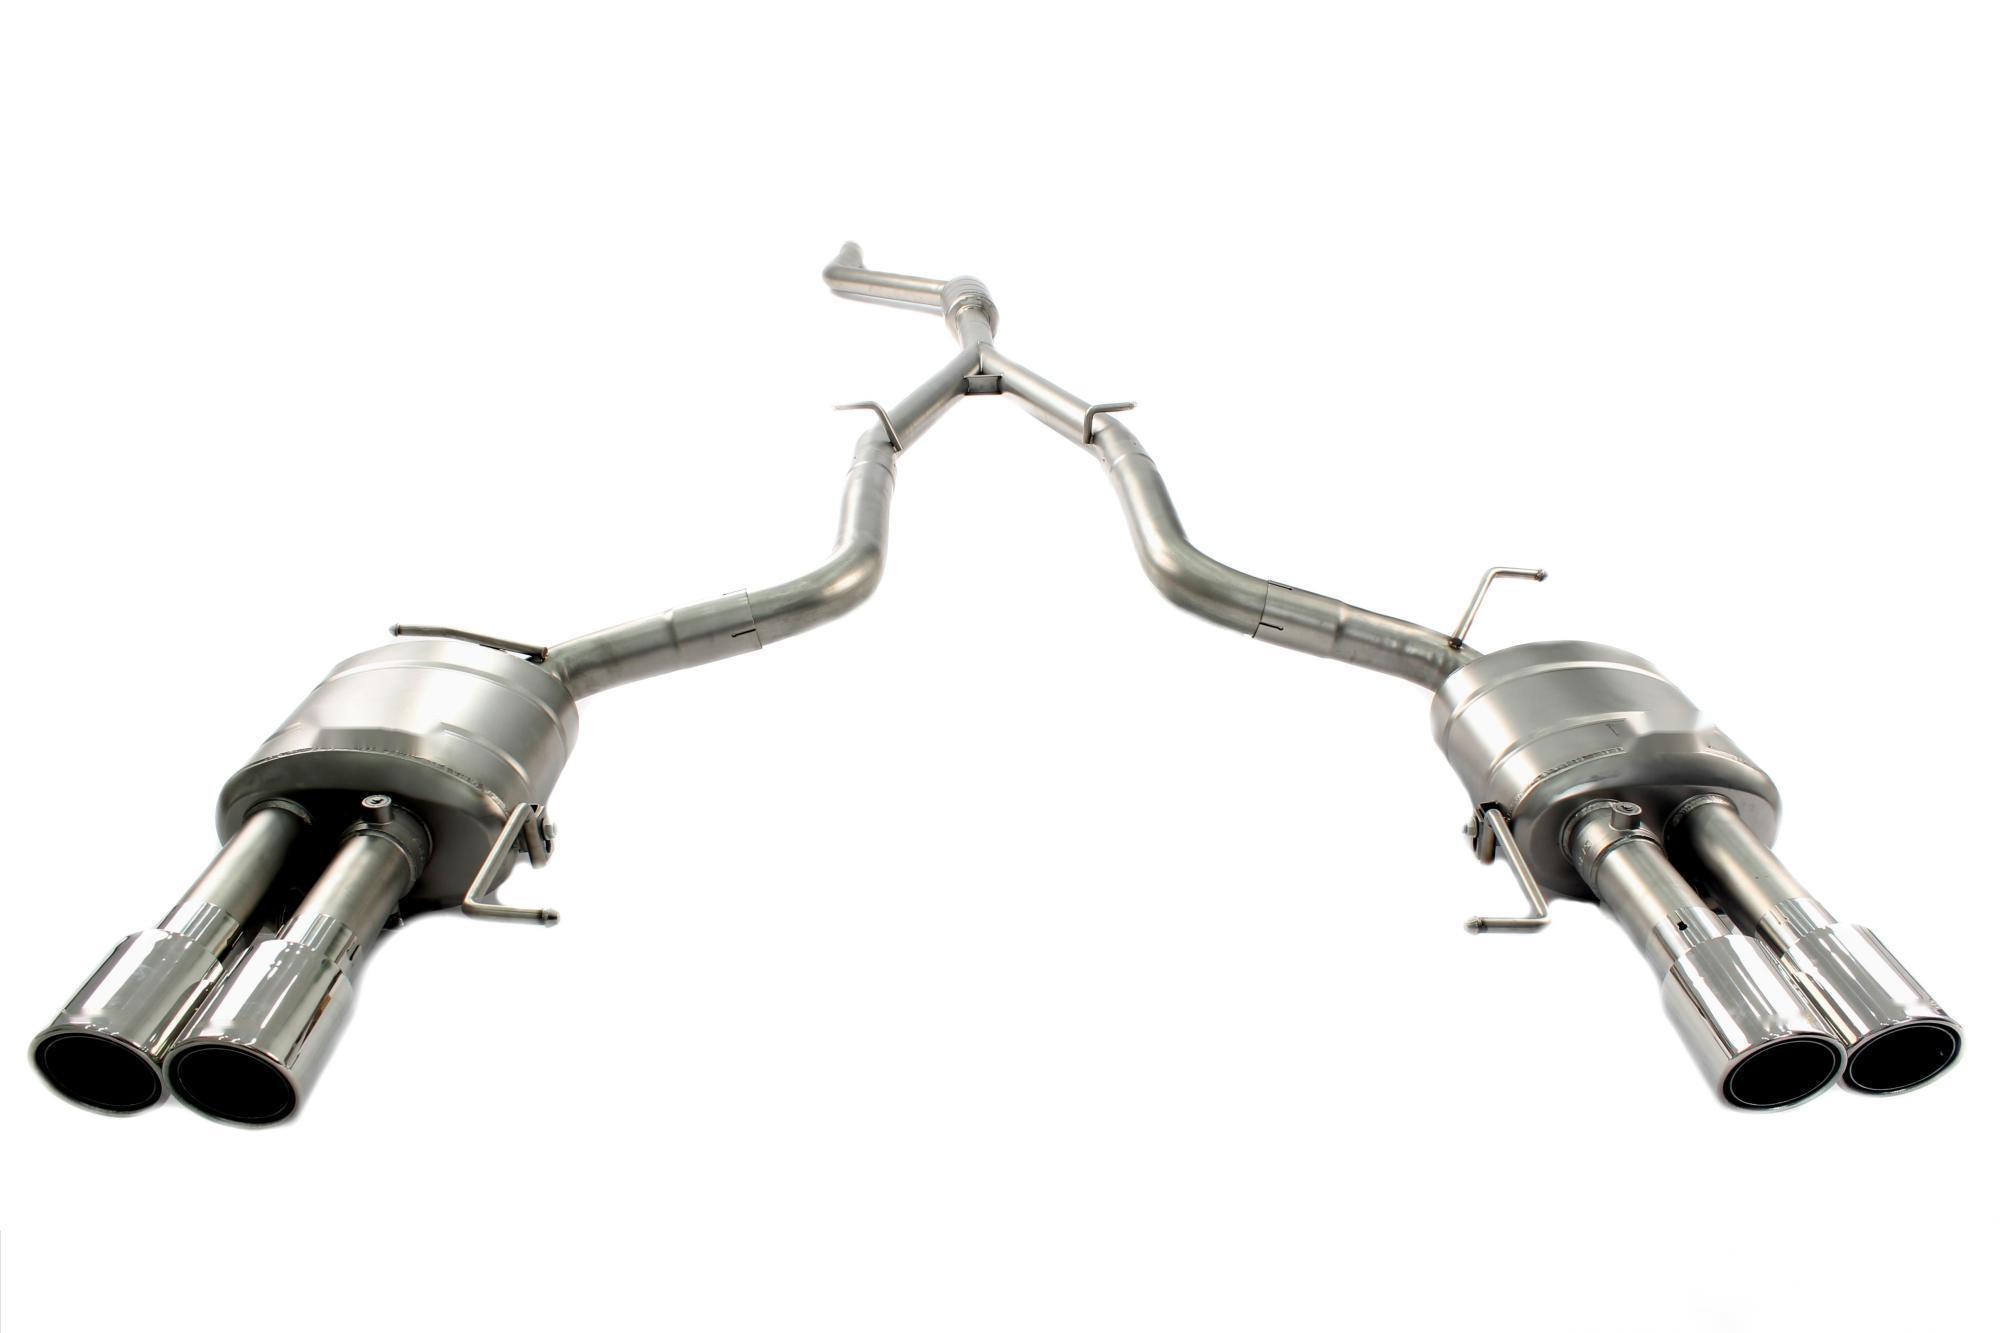 BMW stainless steel exhaust system